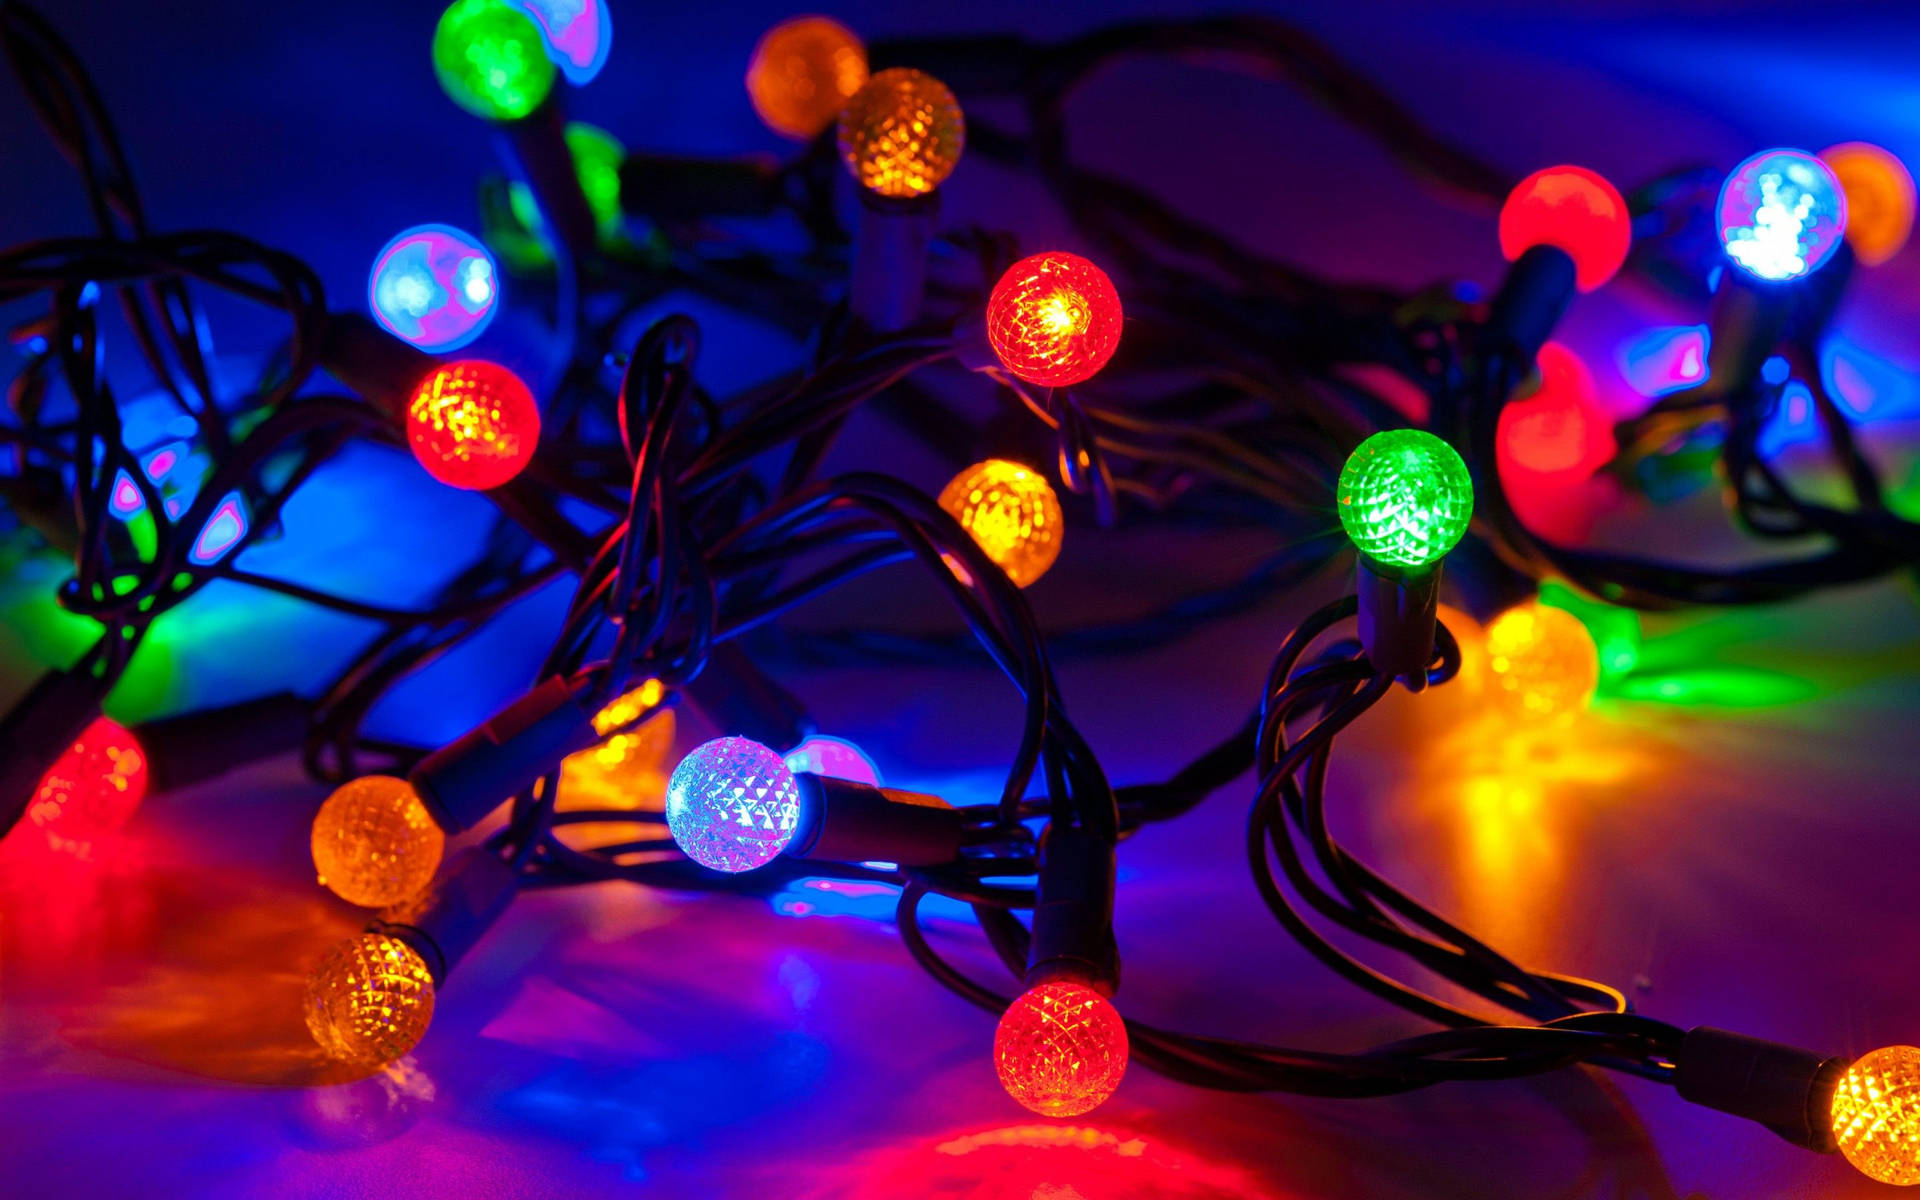 Celebrate the Holidays with Stunning Round Christmas Lights Wallpaper